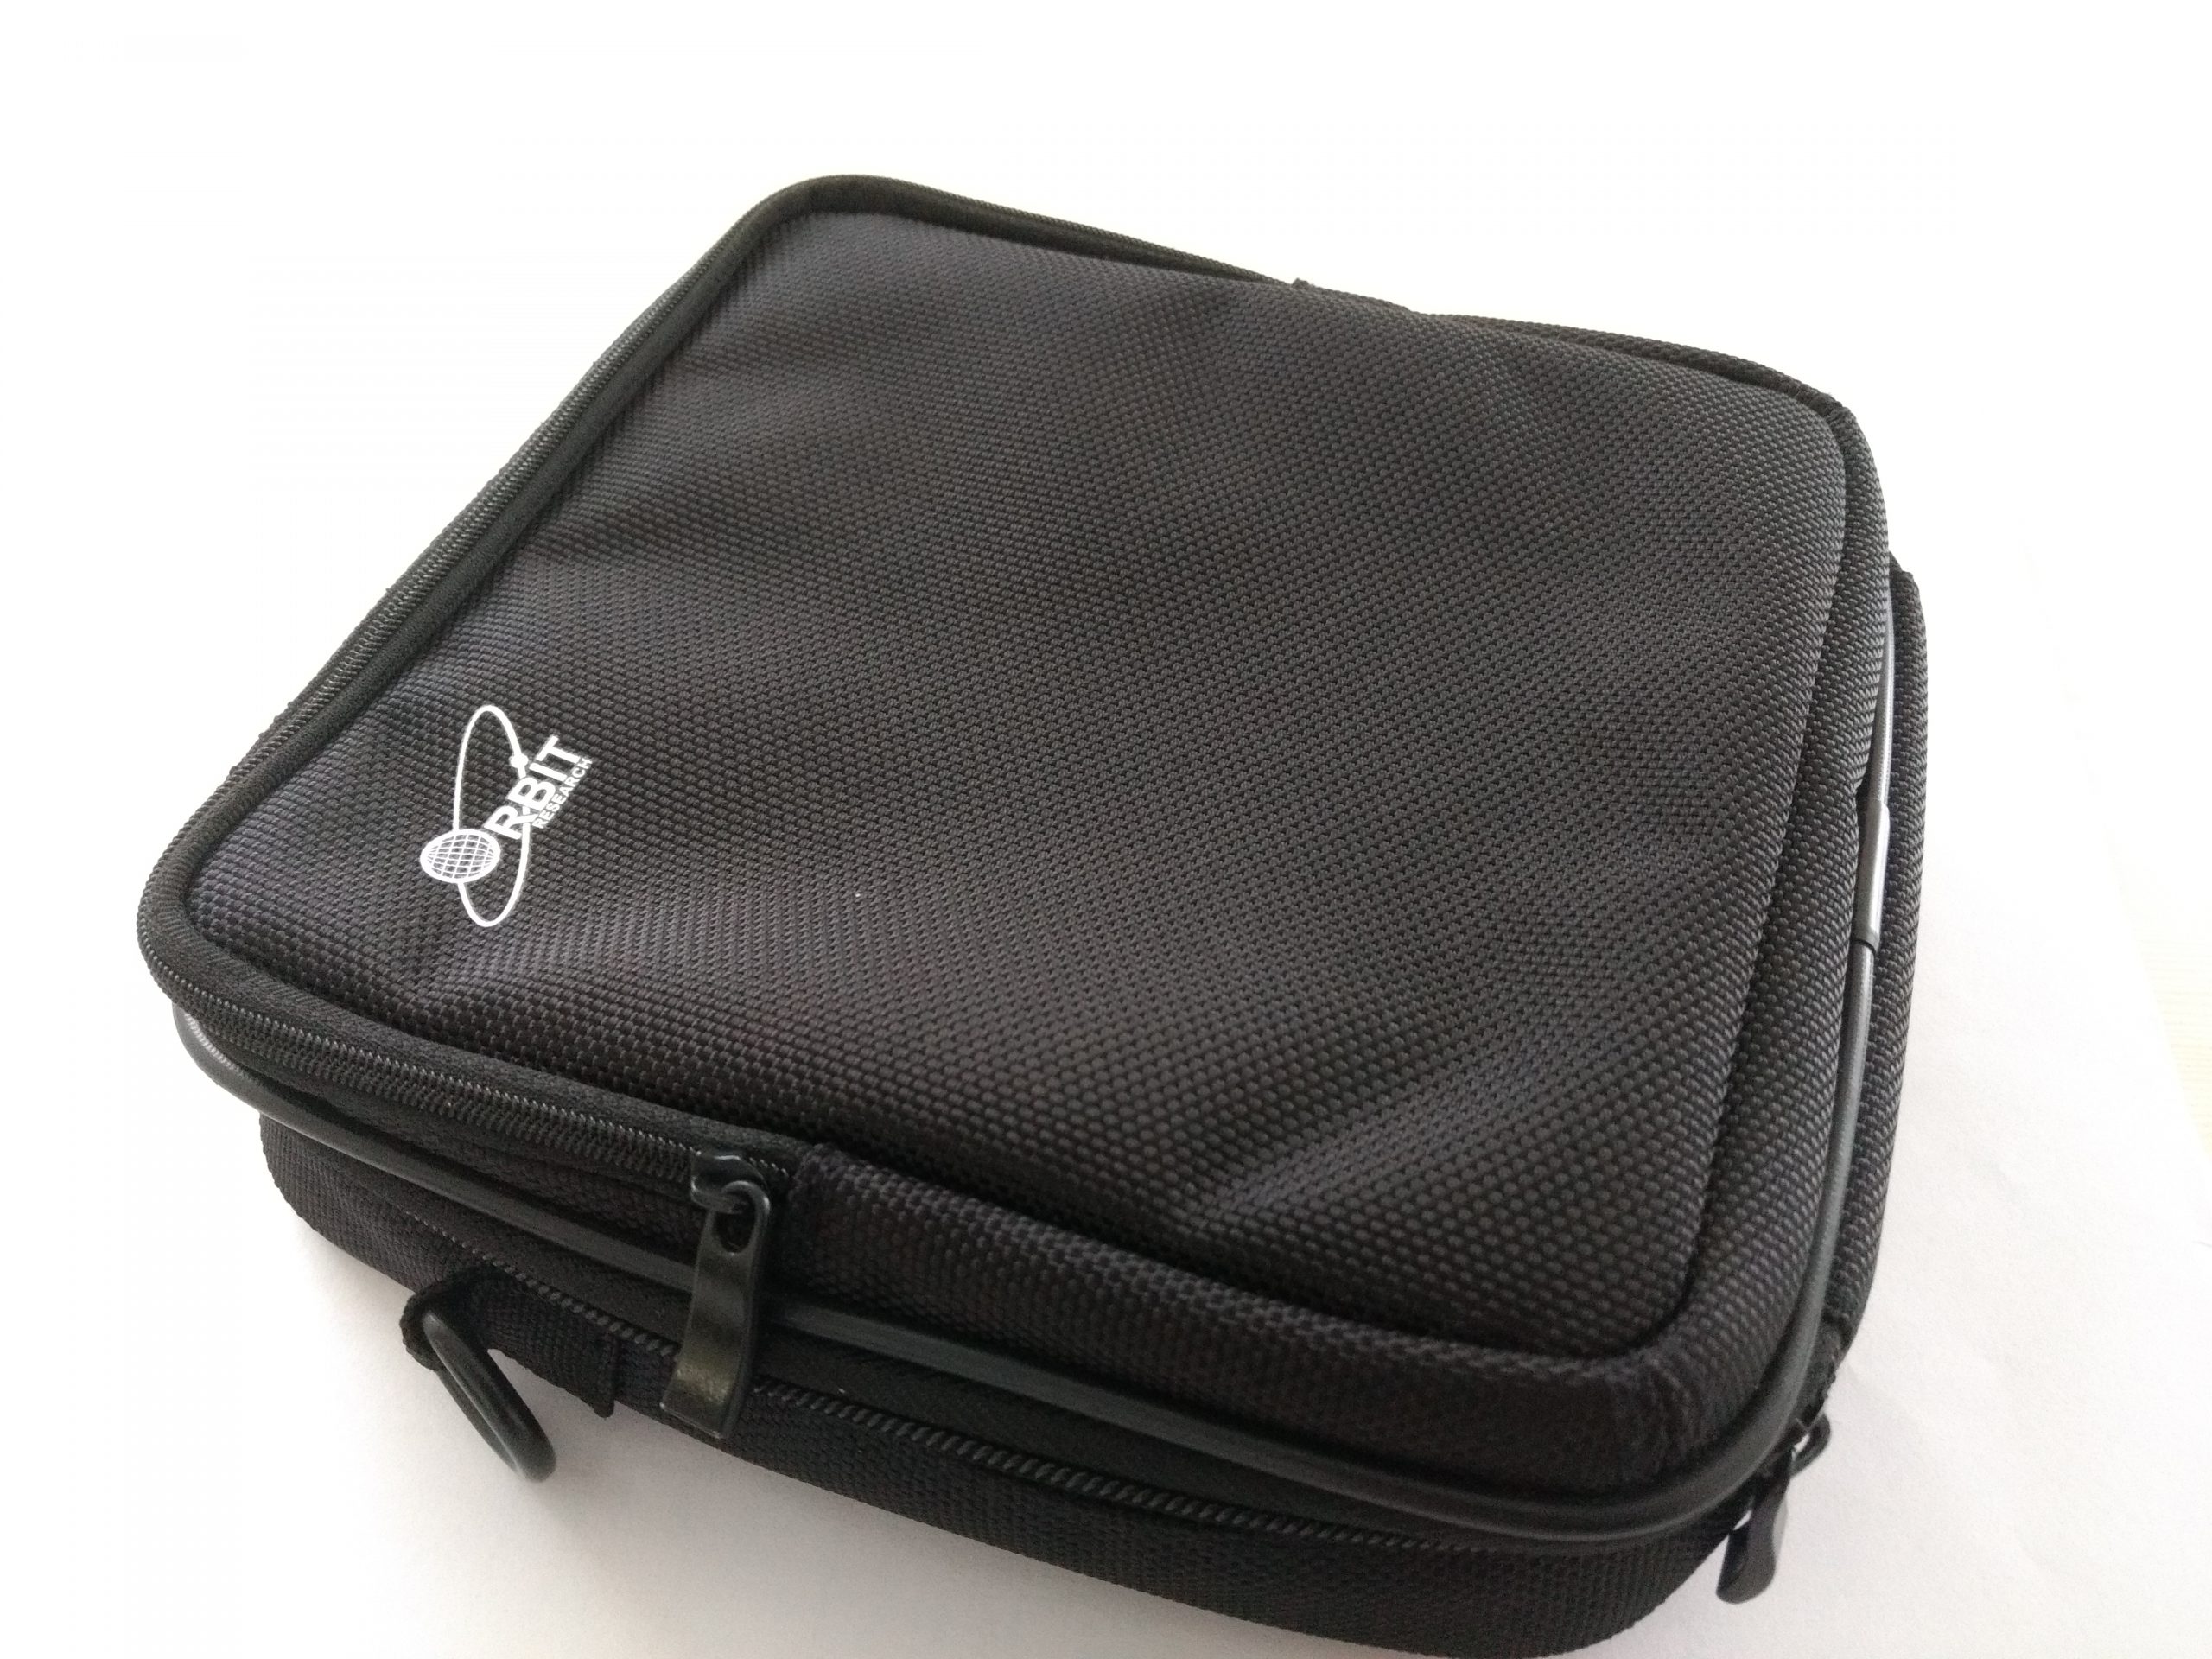 Padded Carrying Case for Orbit Reader 20 and 20 Plus